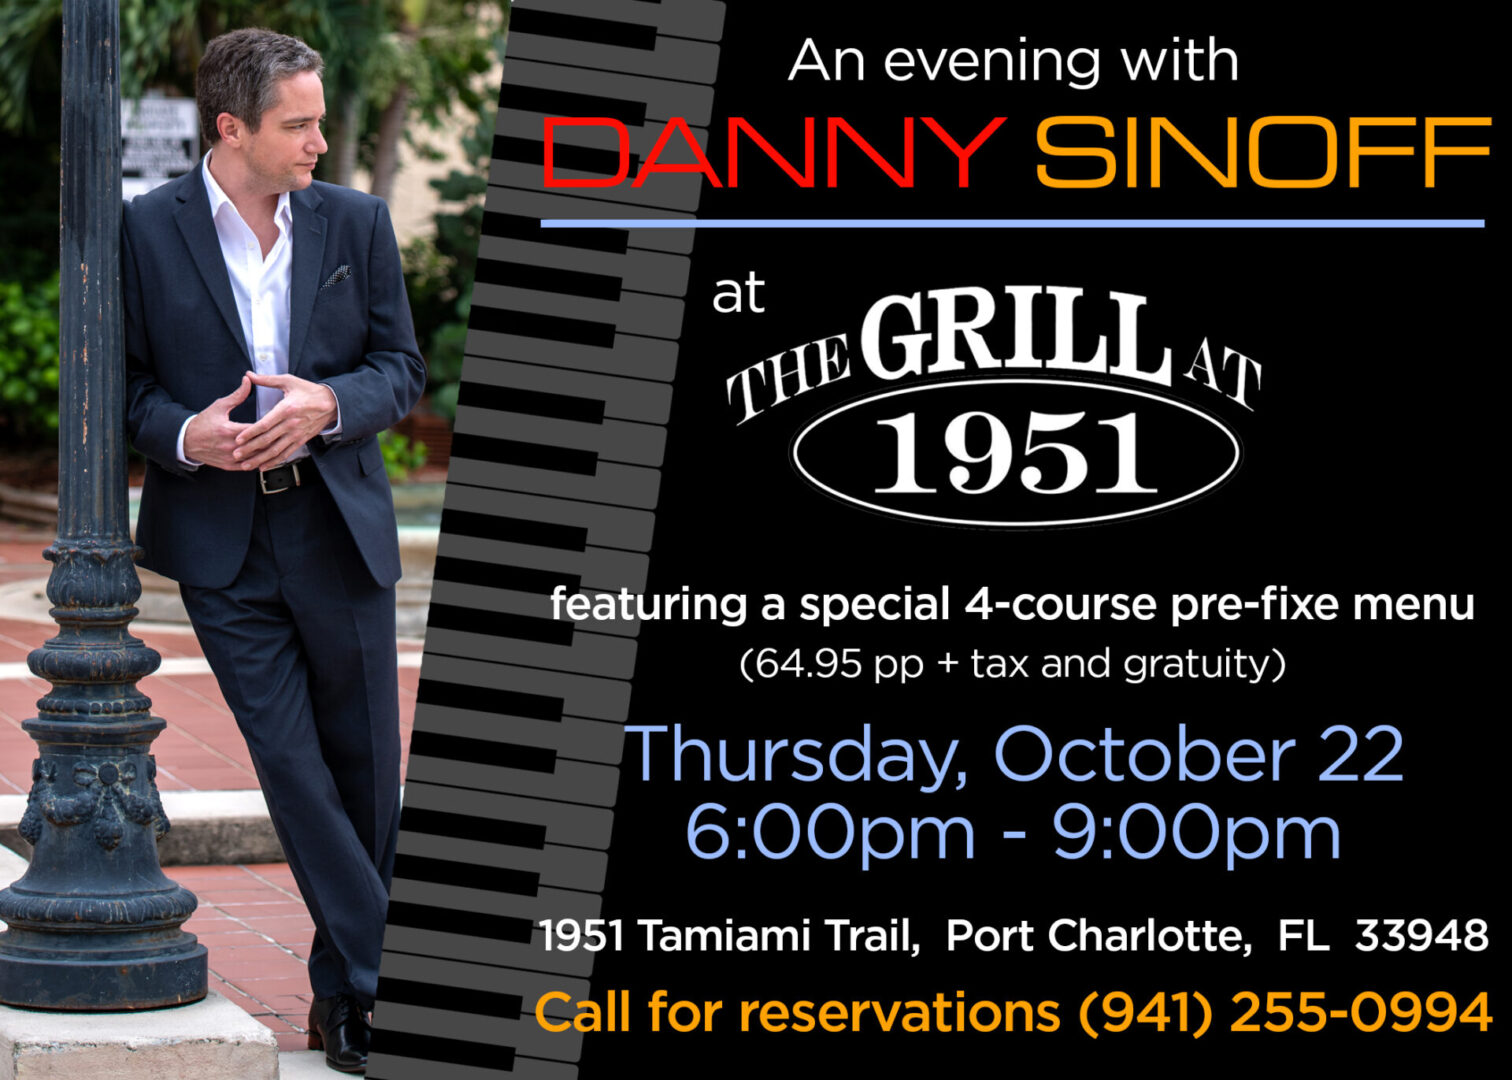 Promotional poster for “An Evening With Danny Sinoff” event at The Grill At 1951